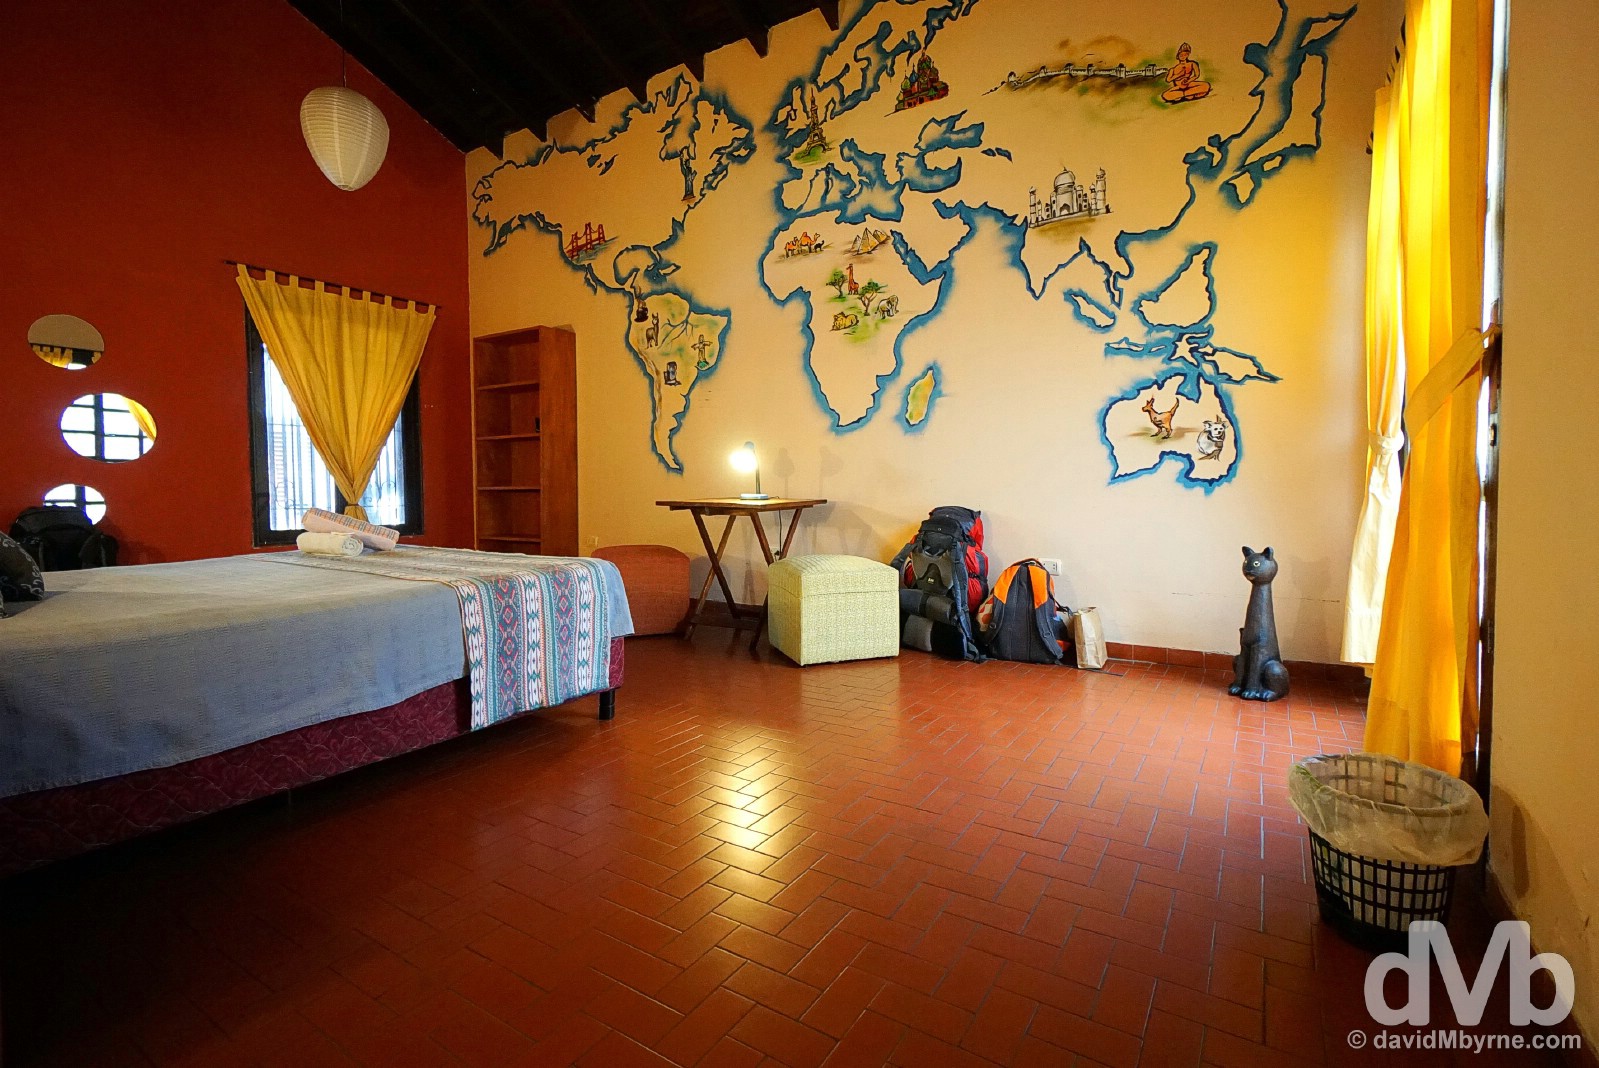 Home in Asuncion. Room 3 of El Nomada Hostel. I'd love this room even if not for the massive, wanderlust-inducing wall map. Asuncion, Paraguay. September 8, 2015.